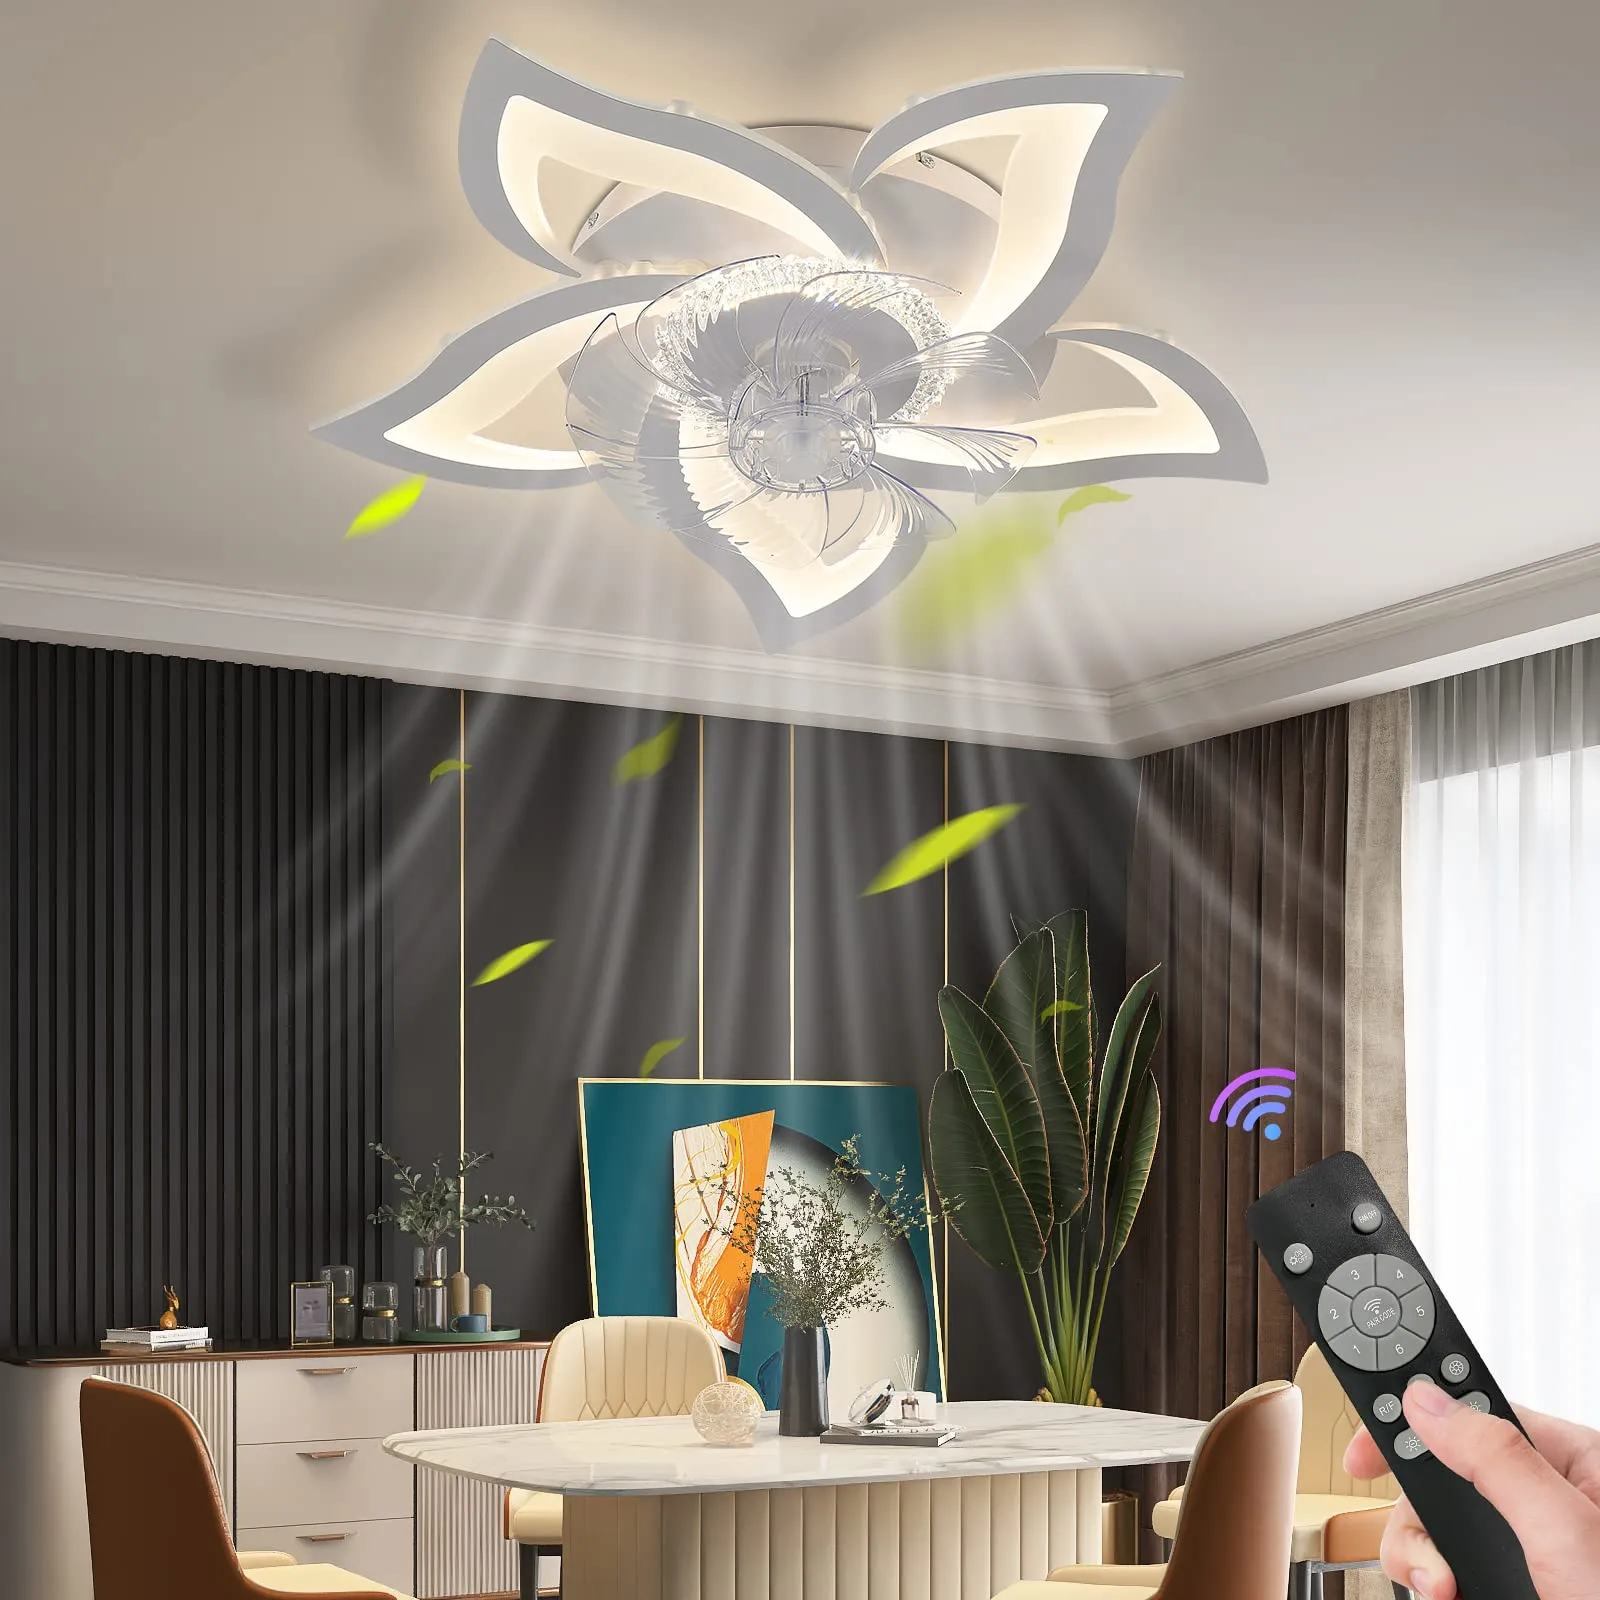 Remote control LED ceiling fan can be an attractive and practical addition to a dining room